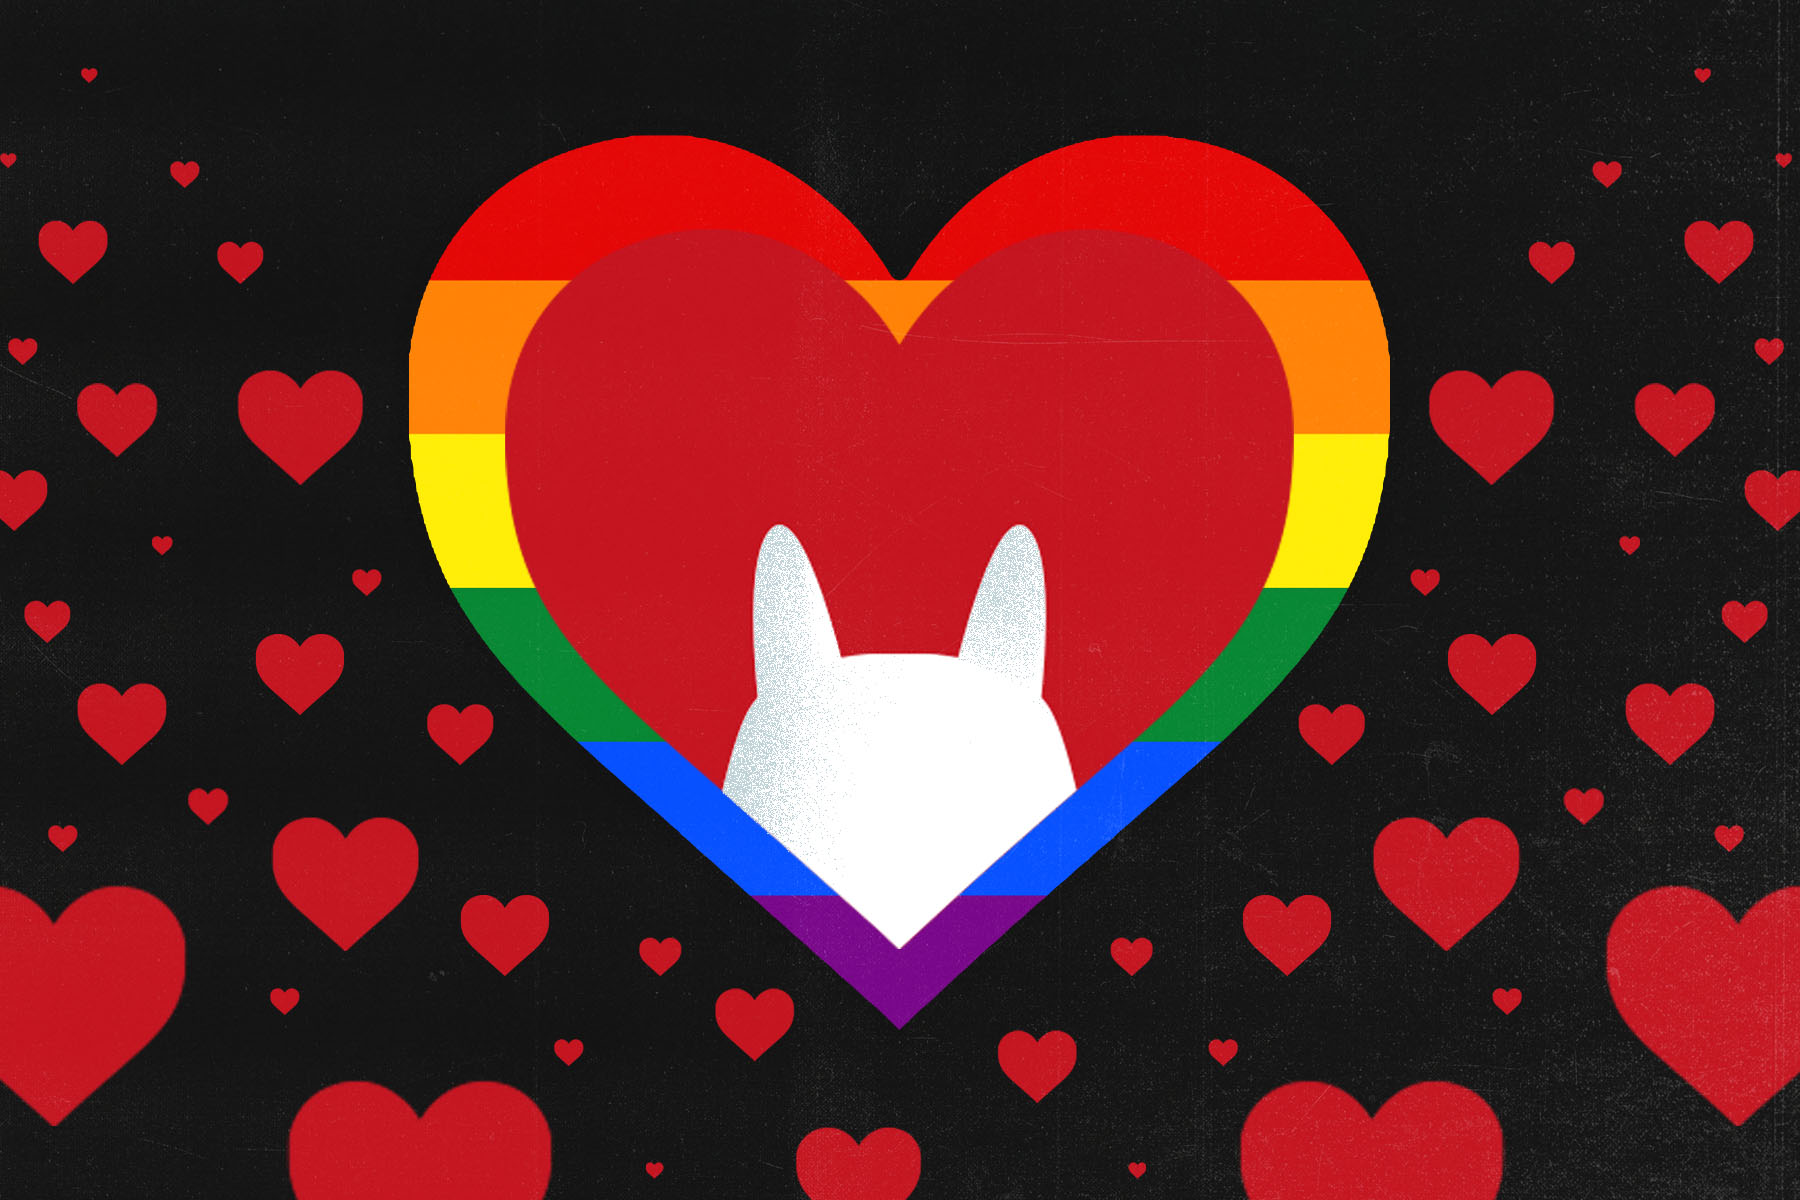 A silhouette of a moomin in a red heart, surrounded by a rainbow border, against a backdrop of floating hearts.